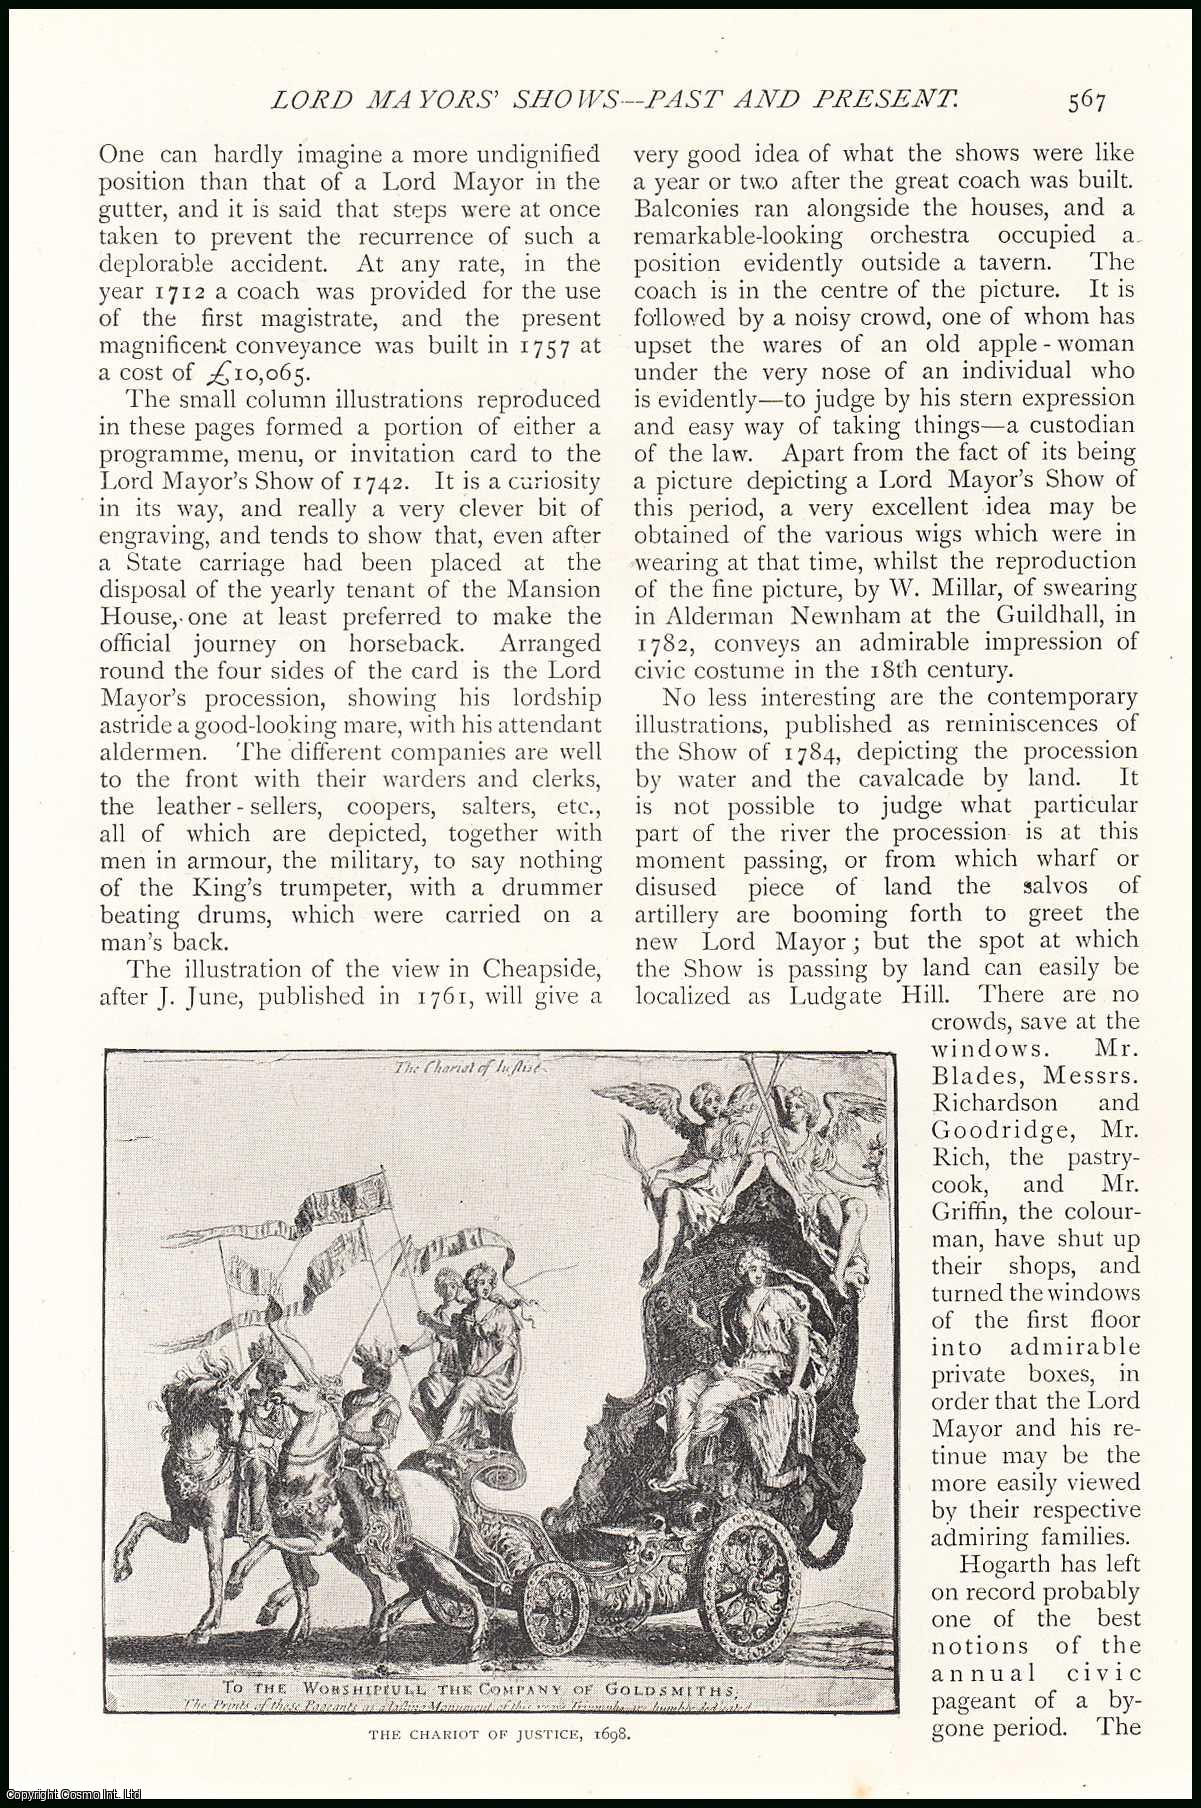 Harry How - Lord Mayors' Shows - Past and Present. An uncommon original article from The Strand Magazine, 1895.